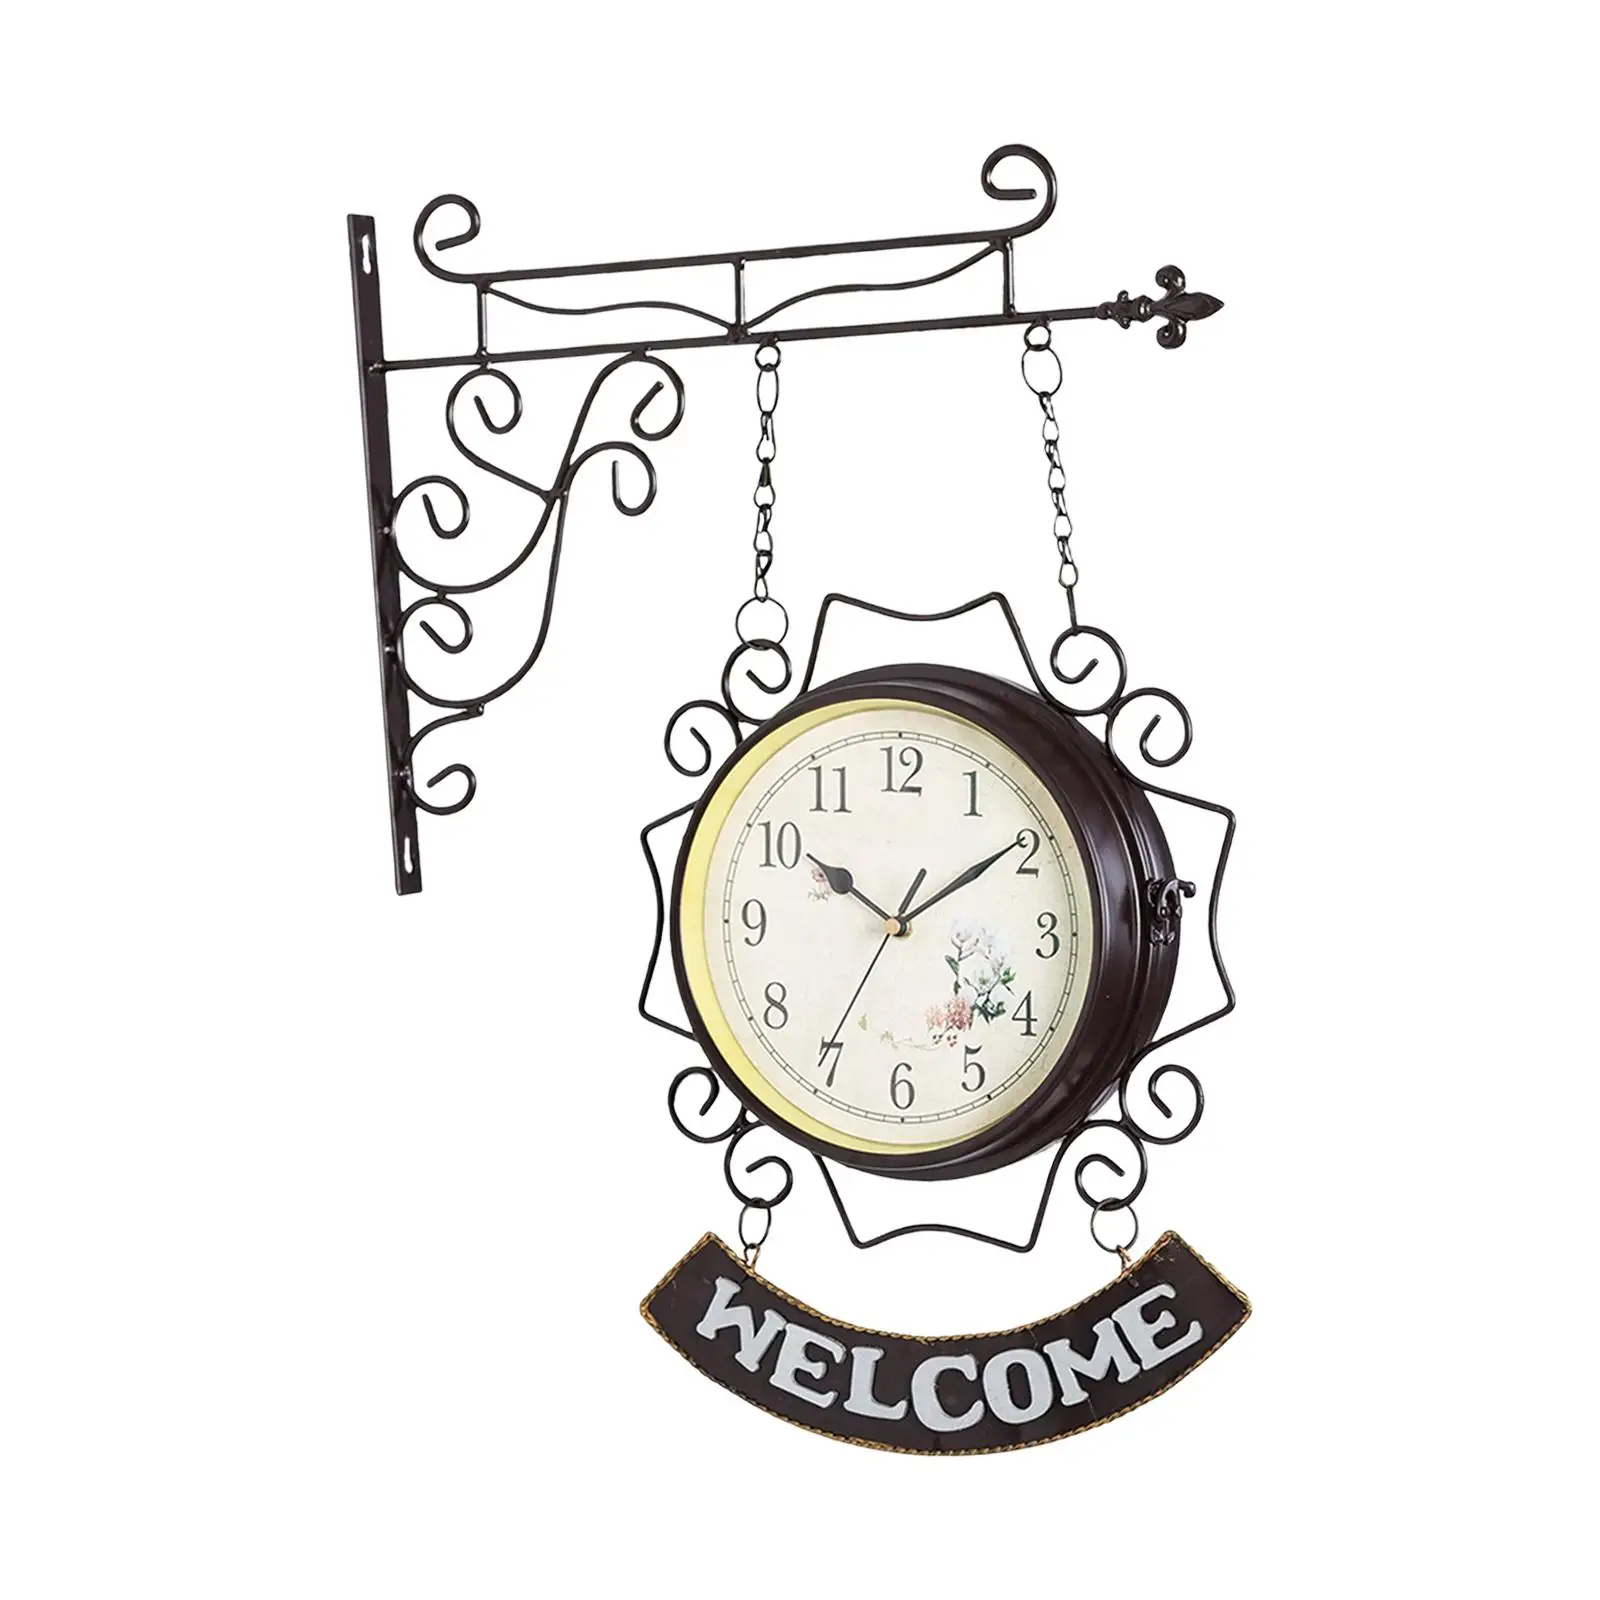 Nordic Double Sided Wall Clock Double Faced Train Station Style Round Silent Decorative for Home Study Outdoor Bedroom Decor